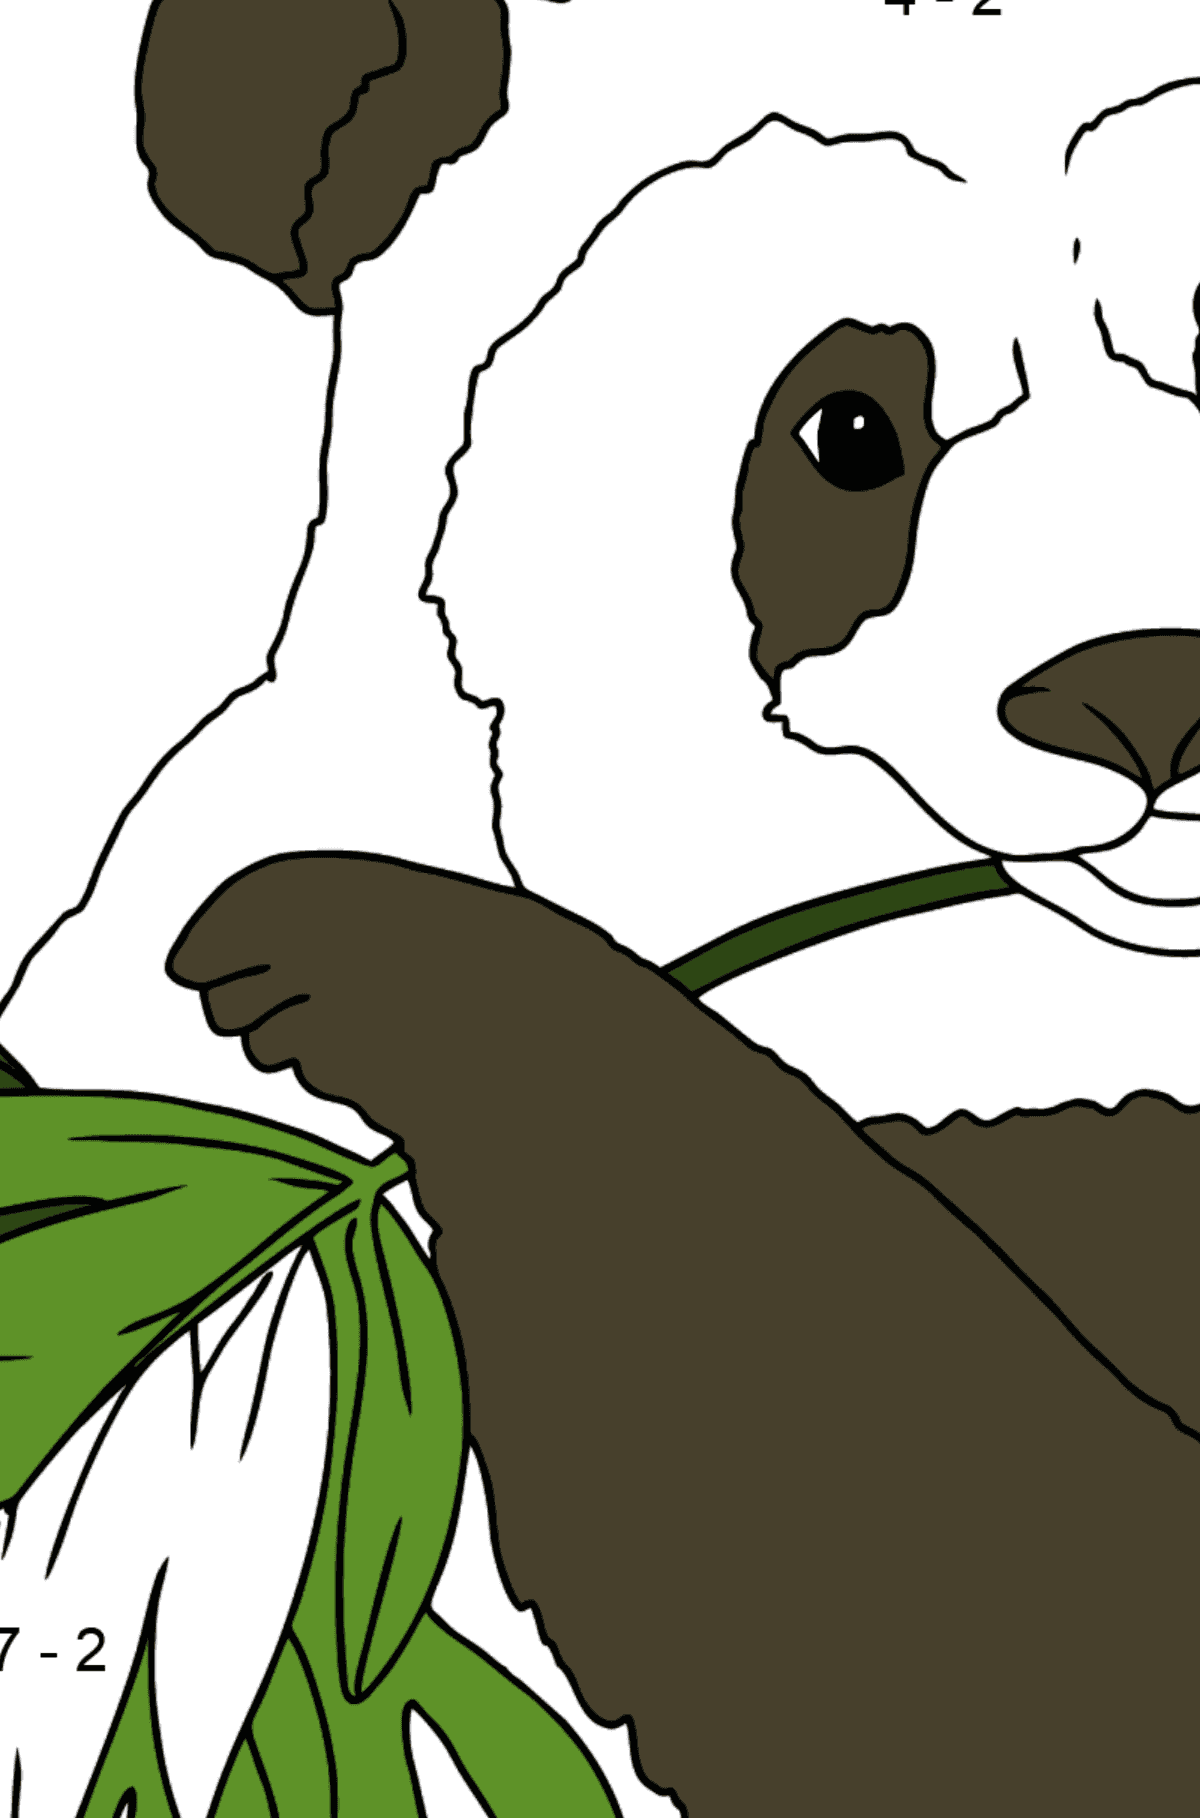 Coloring Page  - A Panda is Eating Leaves - Math Coloring - Subtraction for Kids